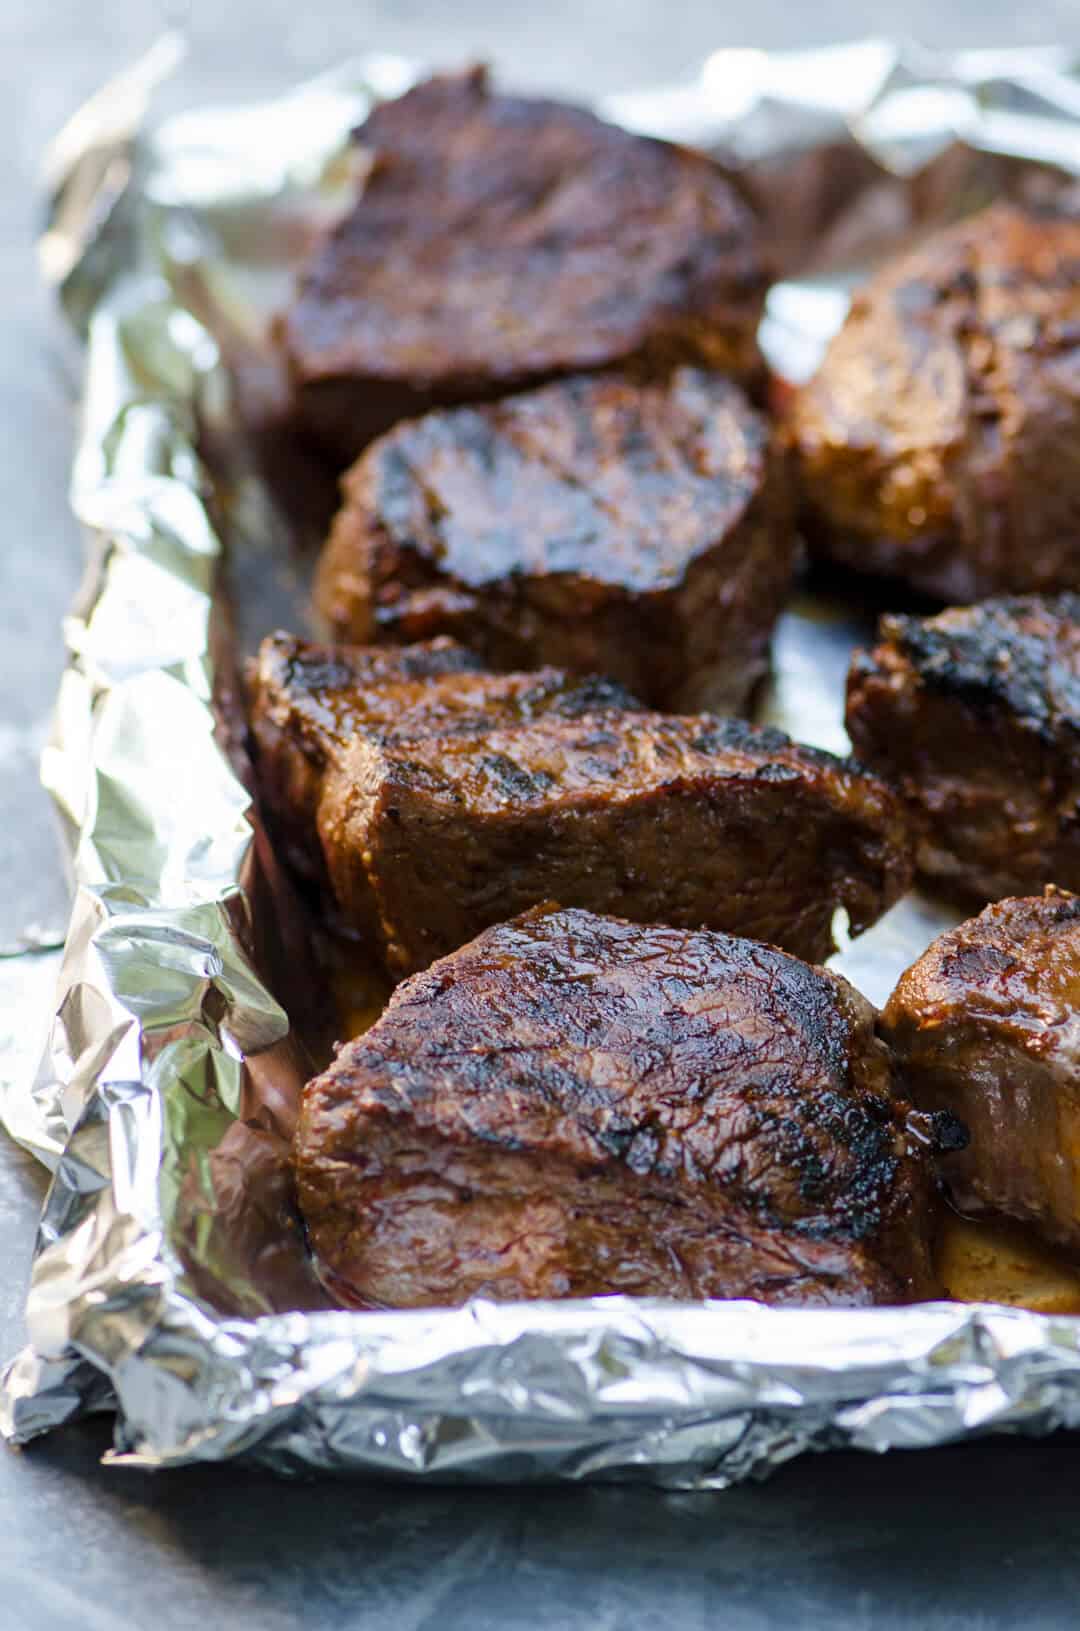 Pieces of grilled steak on a foil lined baking sheet.